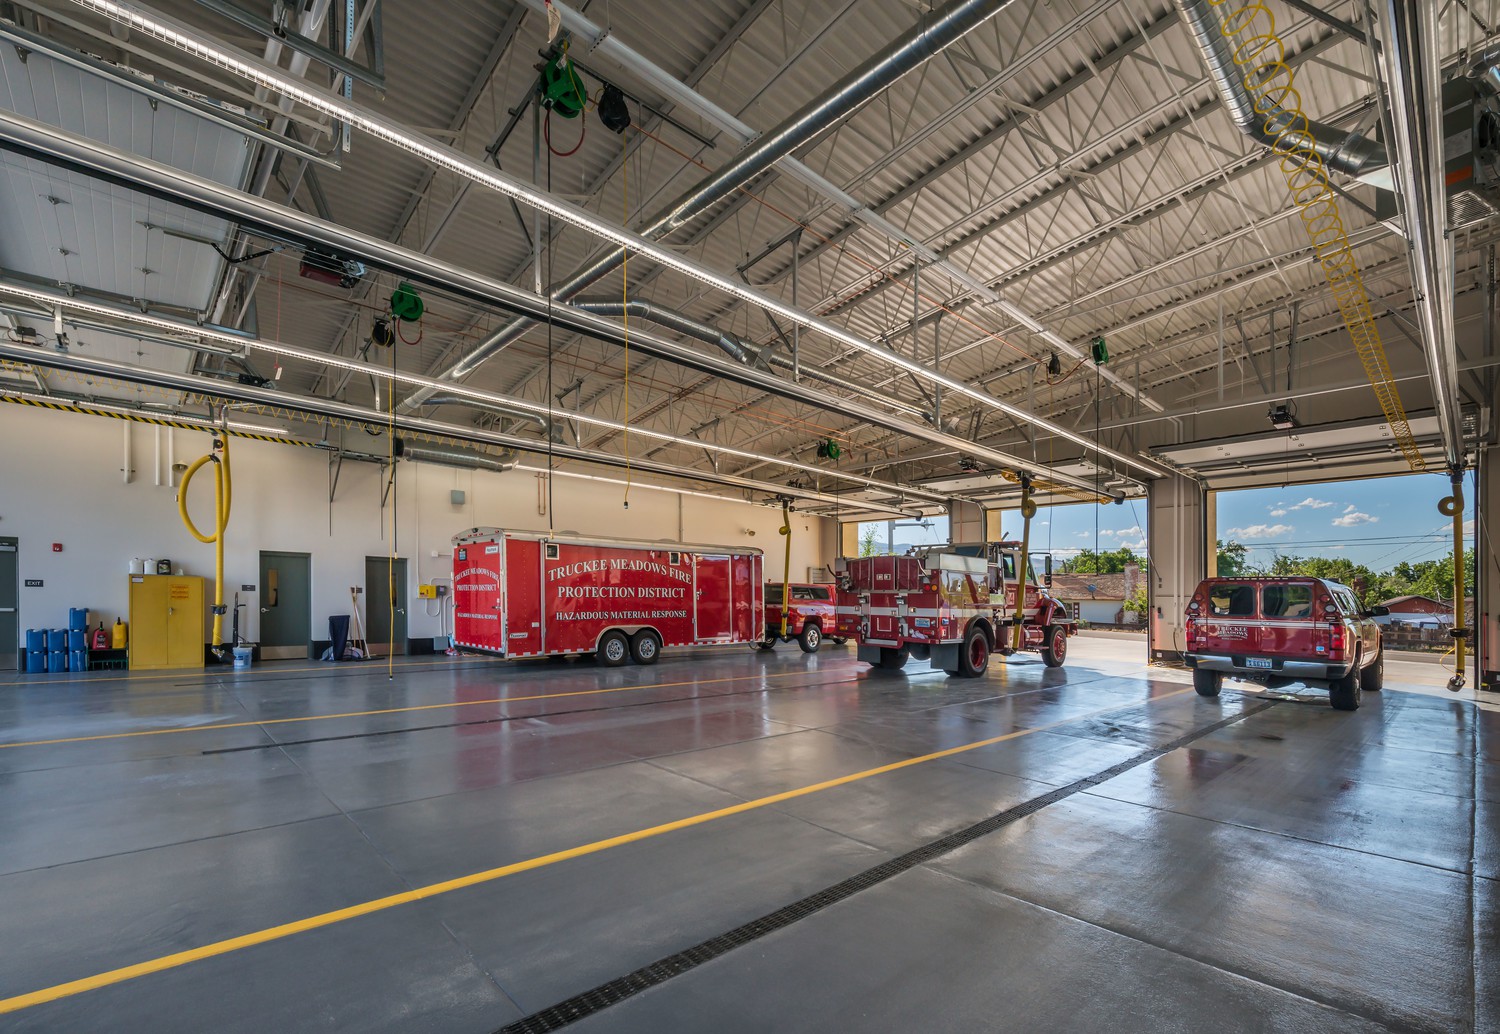 Inside a large fire truck bay showing two red fire SUVs and a red trailer.